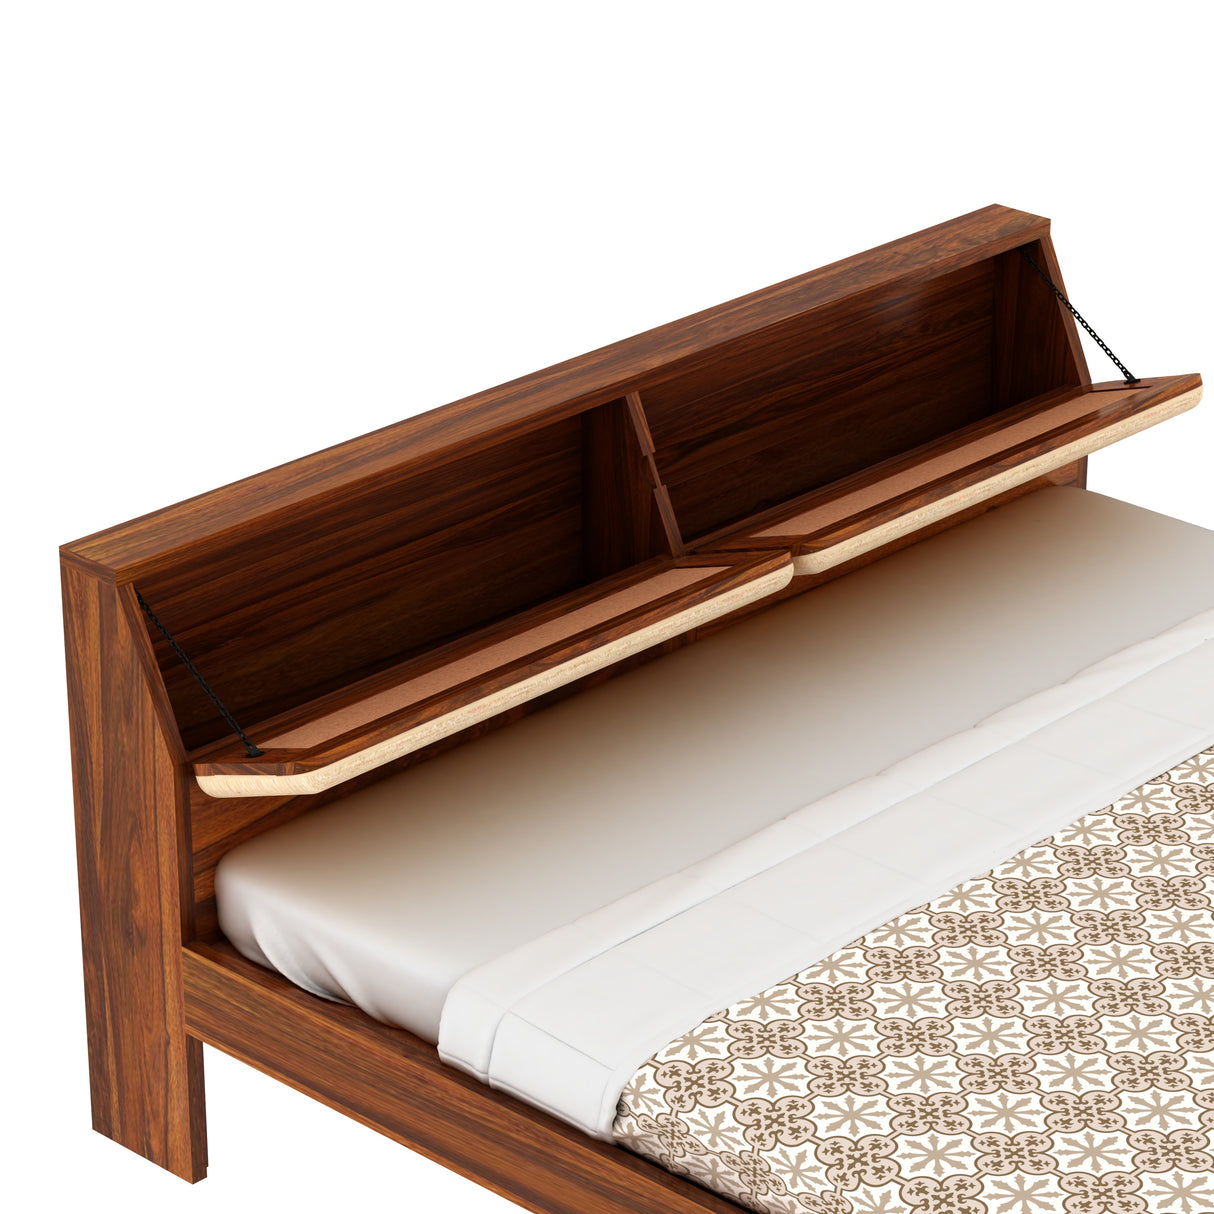 Victoria Solid Sheesham Wood Bed Without Storage - 1 Year Warranty